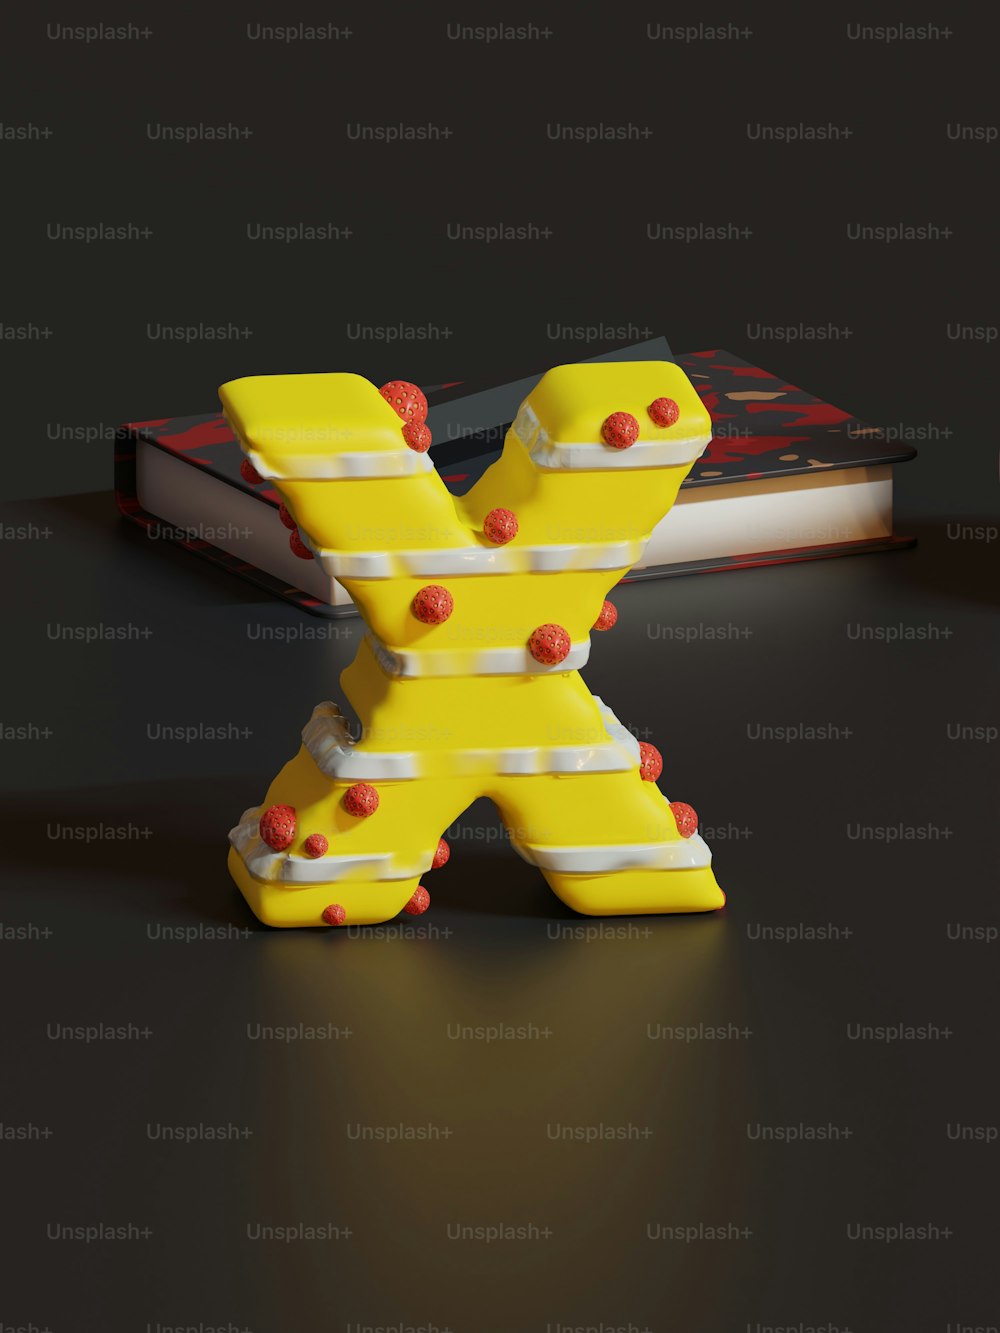 a yellow x shaped object sitting on top of a table